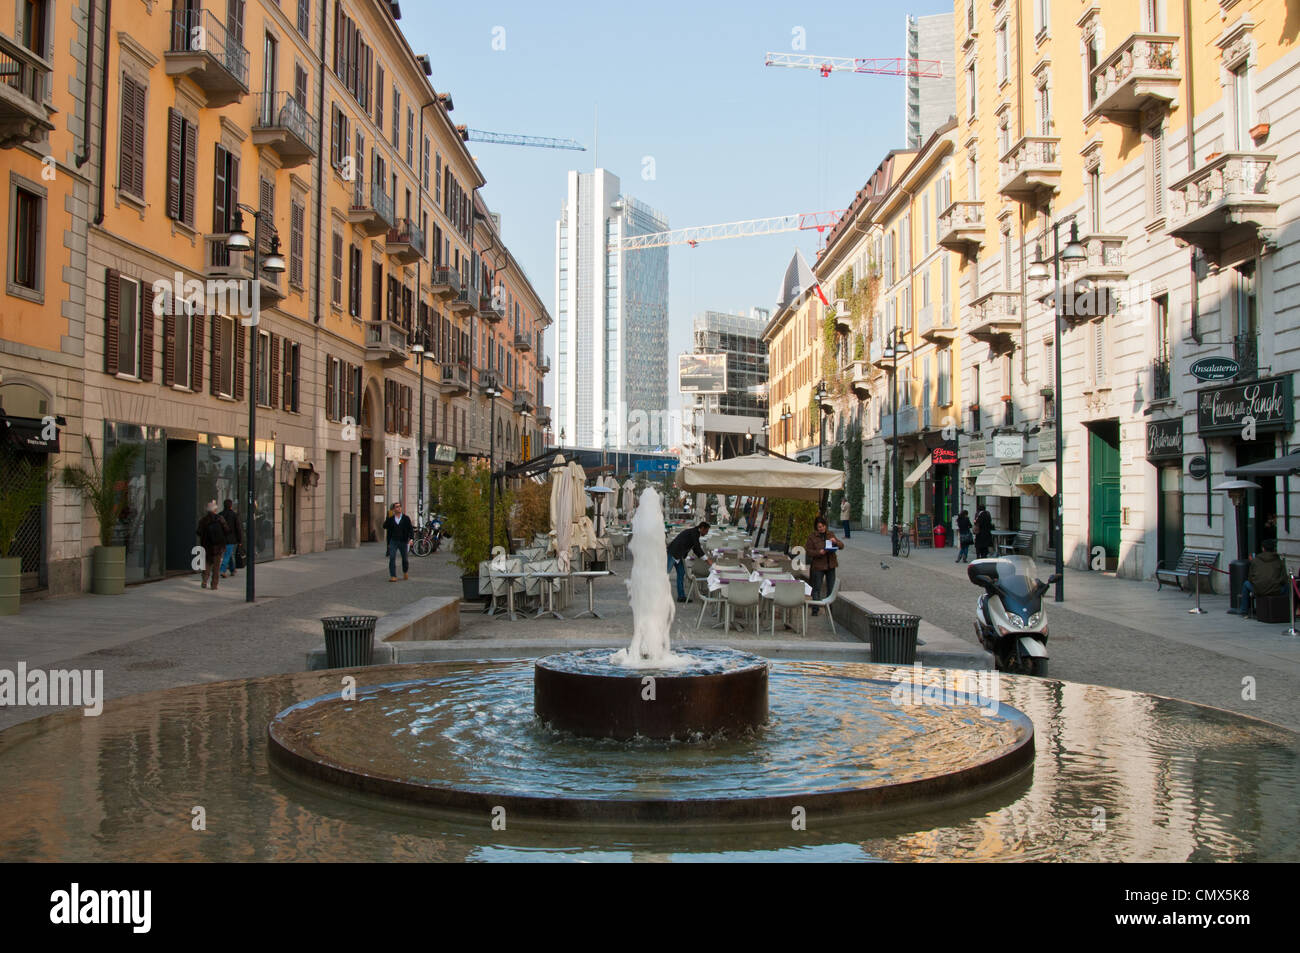 Pedestrianised street with water feature in Milan Stock Photo